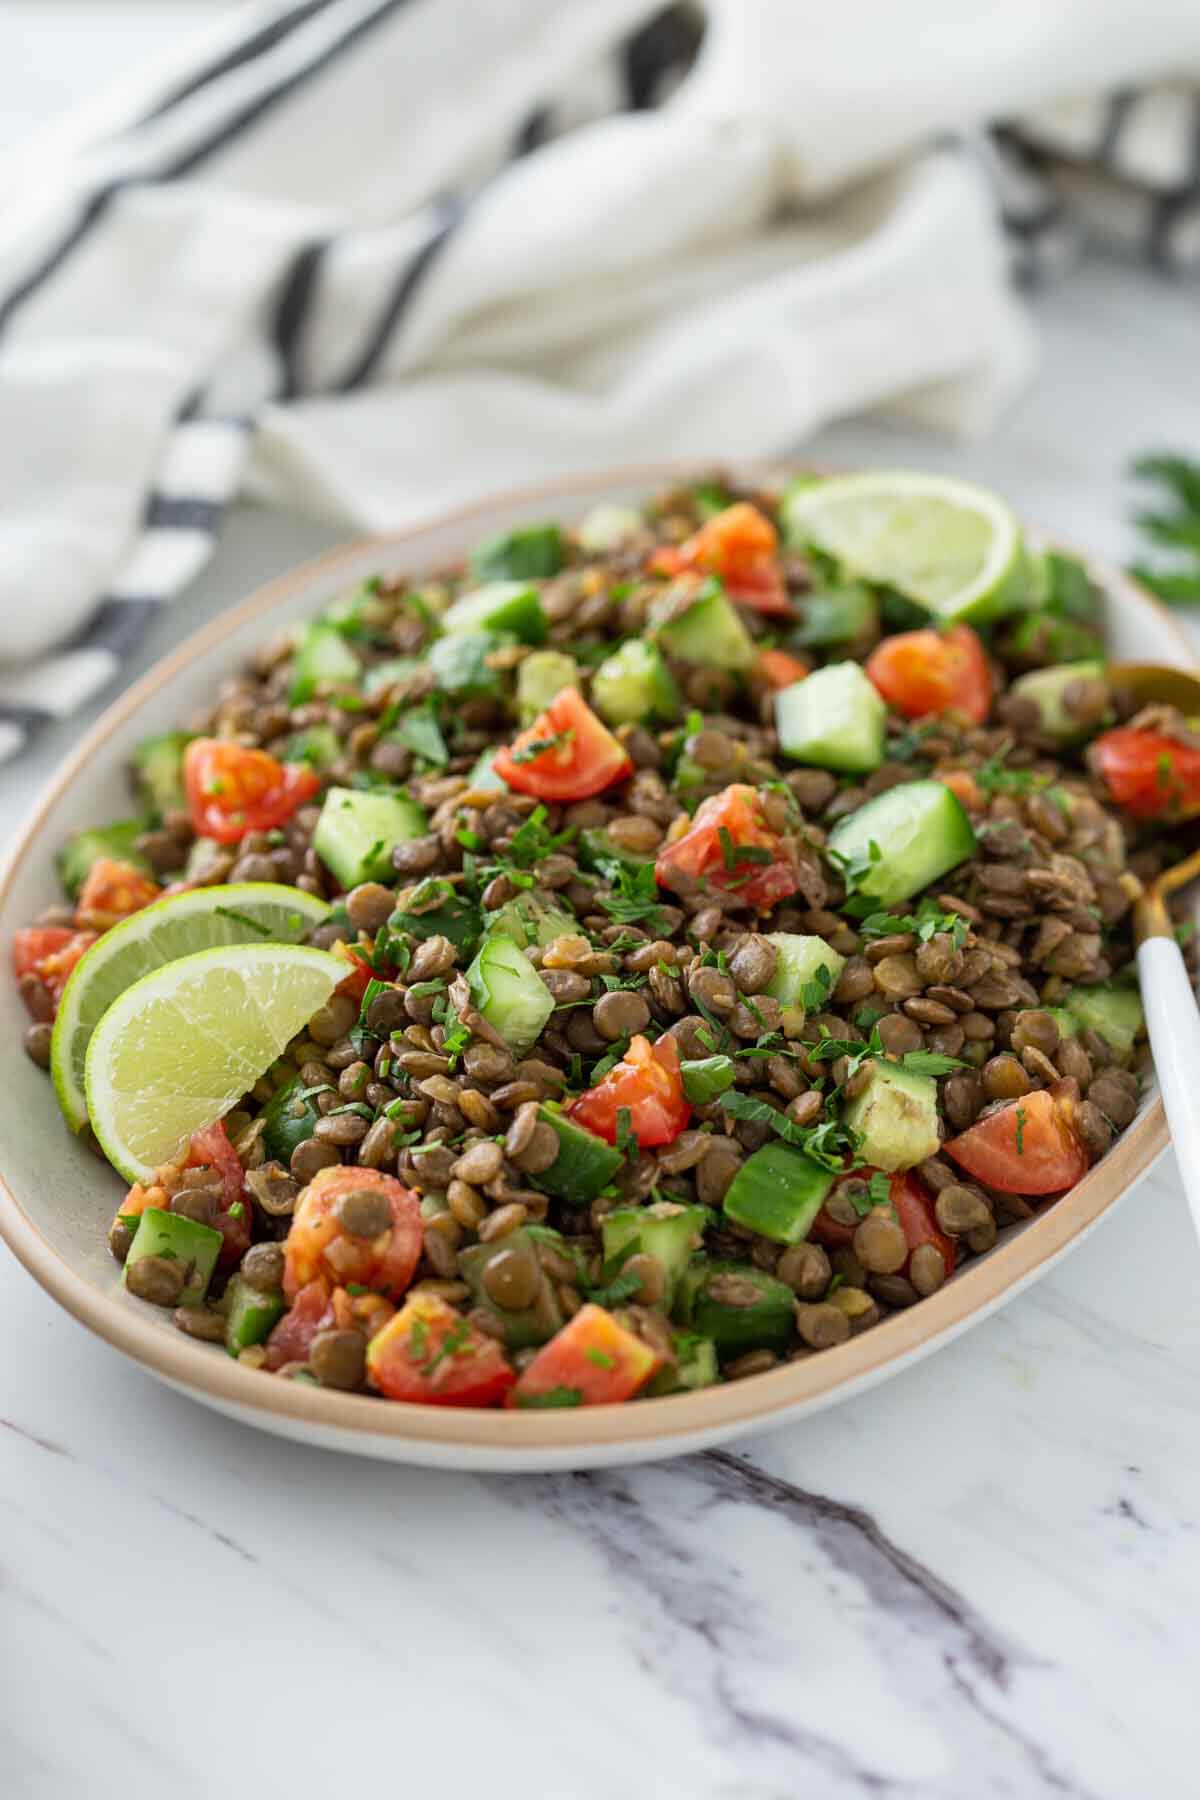 Healthy Italian lentil salad in a serving dish ready to serve.